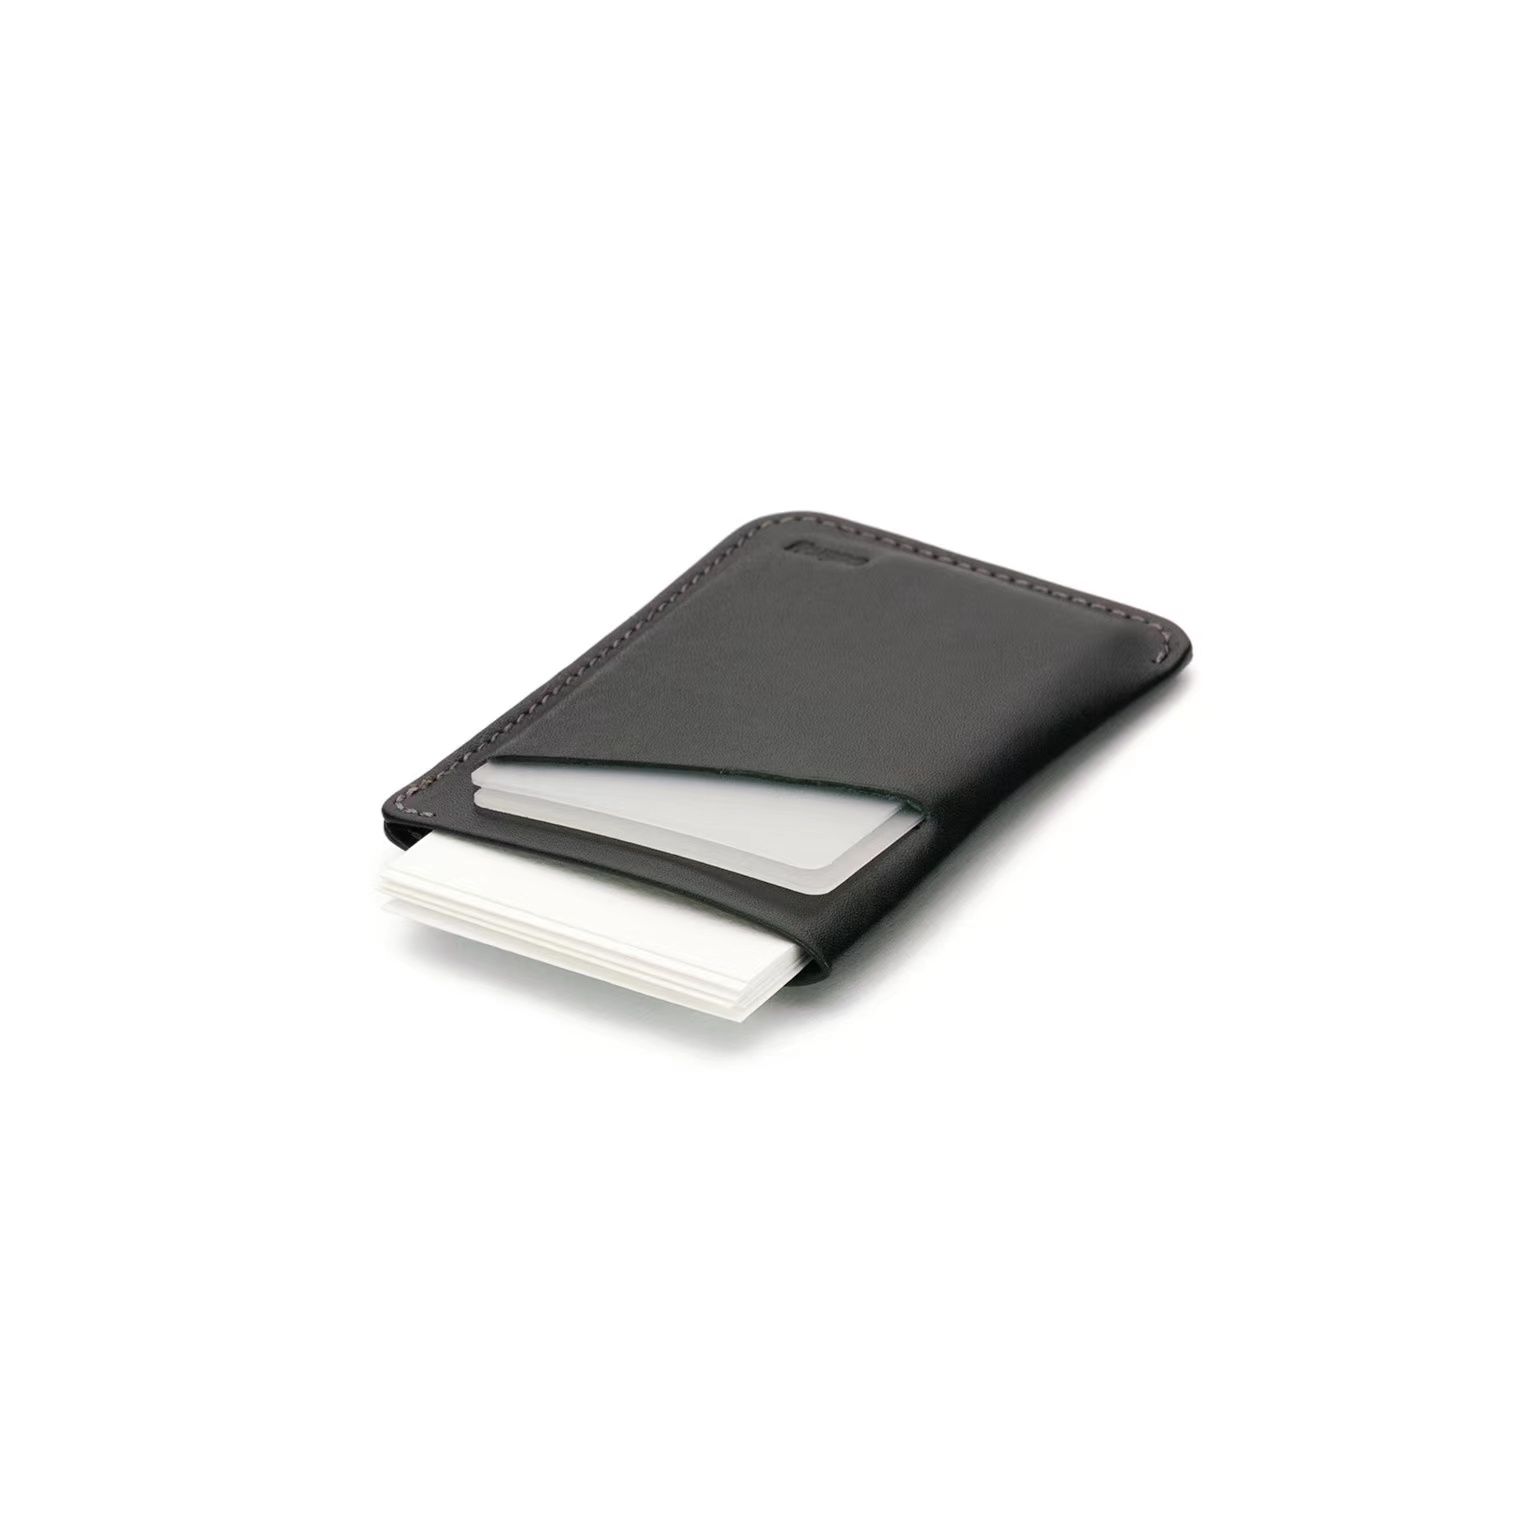 Orbitkey and Bellroy Personal Accessories Gift Set